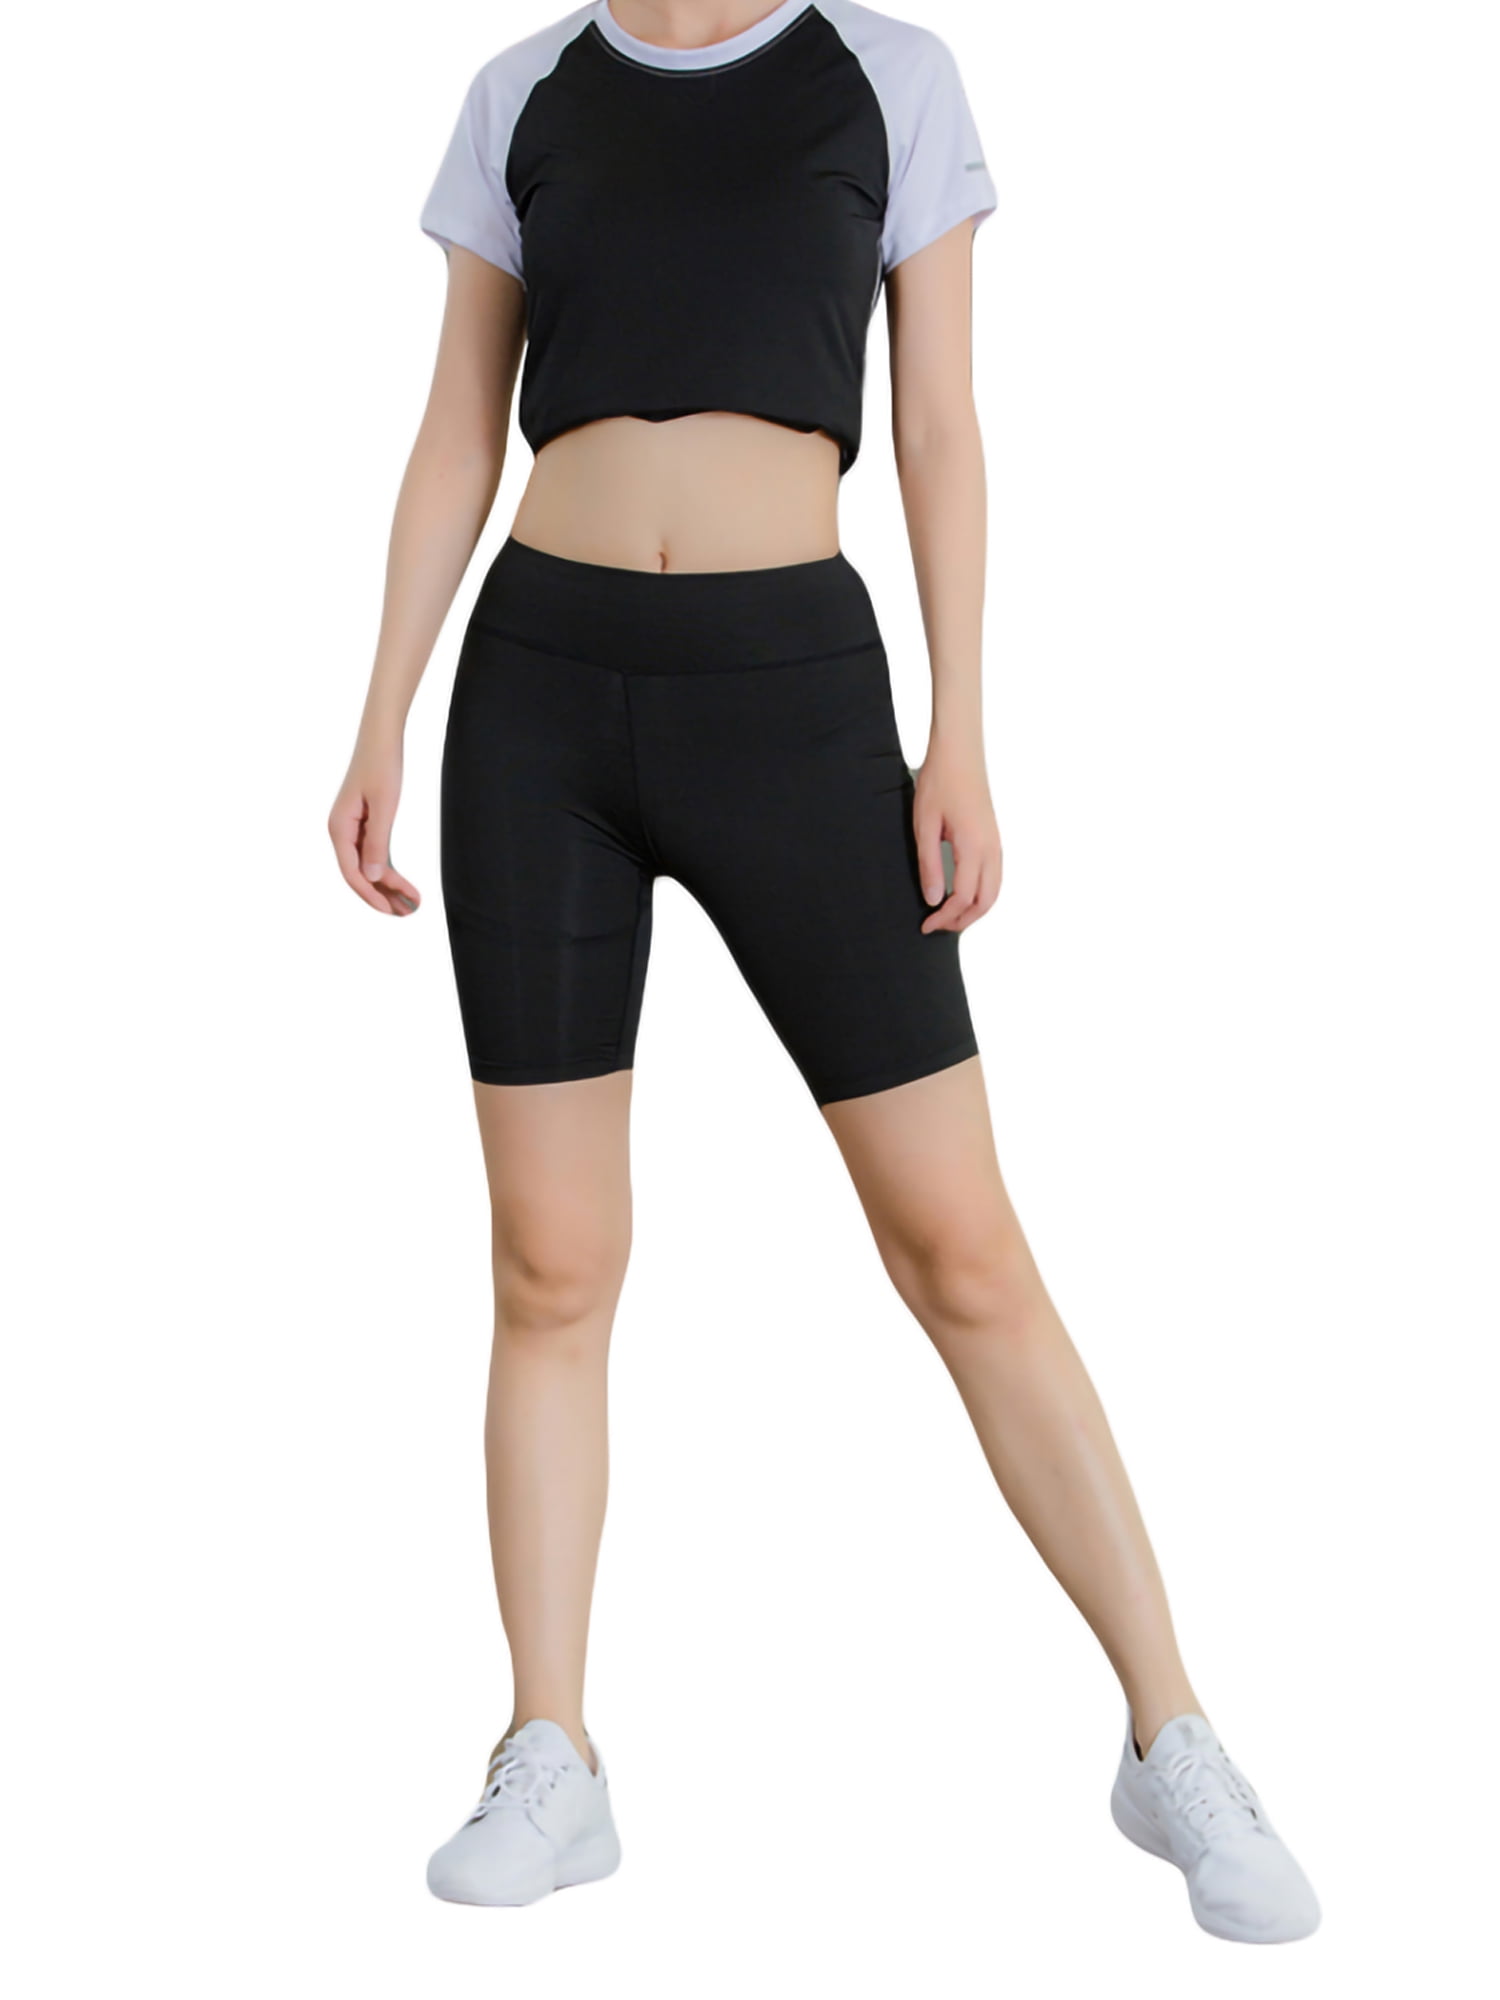 Sports Gym Workout Fitness Jogging Yoga Cycling Shorts Top